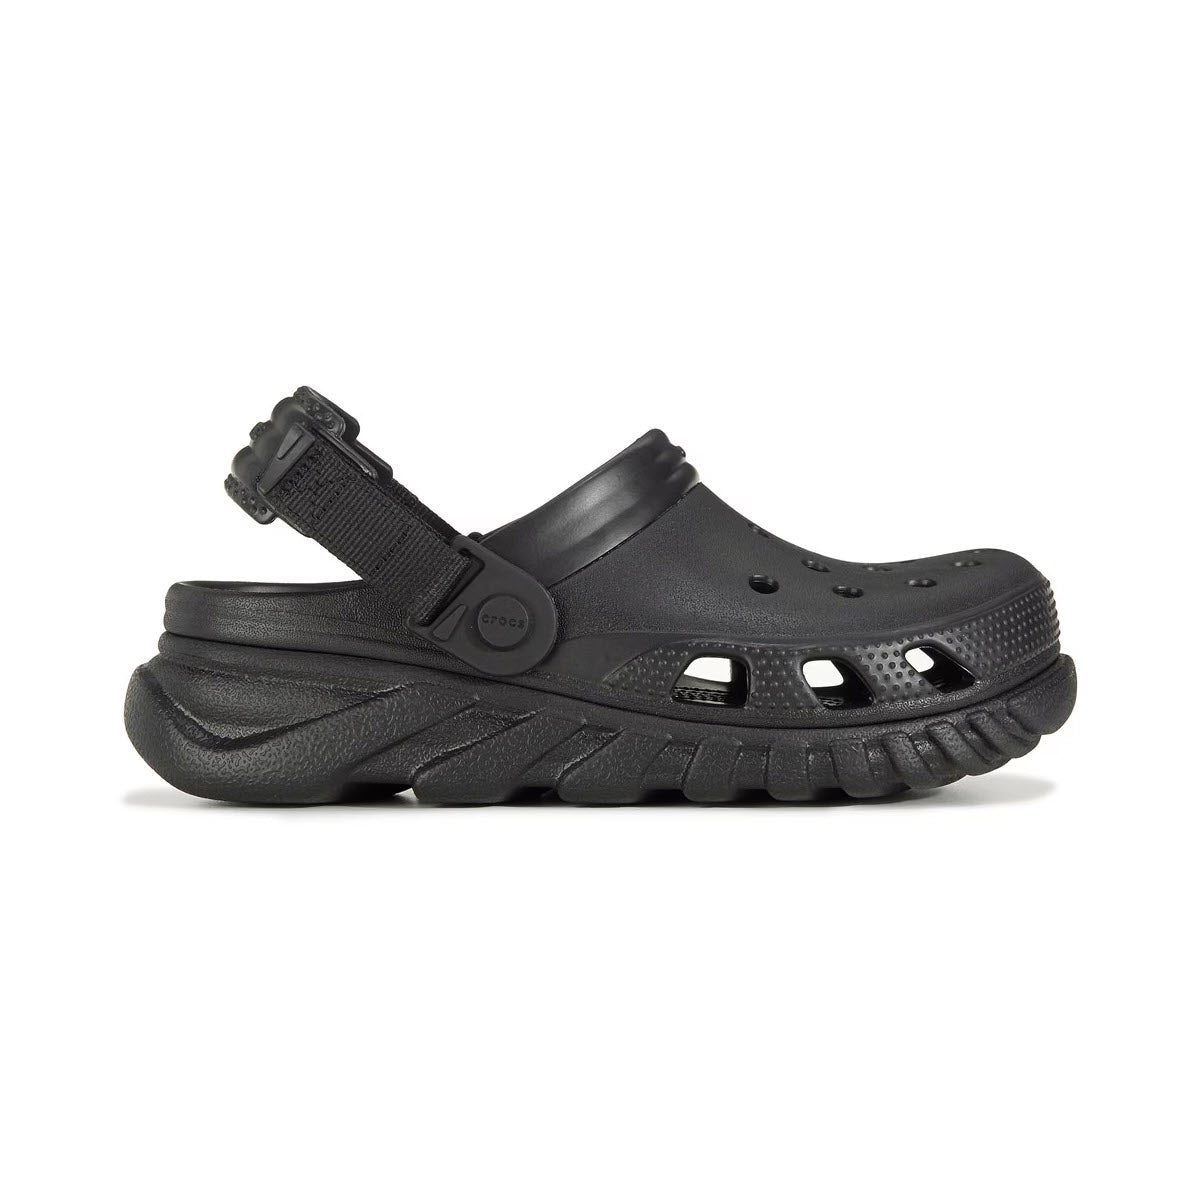 Crocs Duet Max II clog in black with adjustable back straps and textured sole, isolated on a white background.